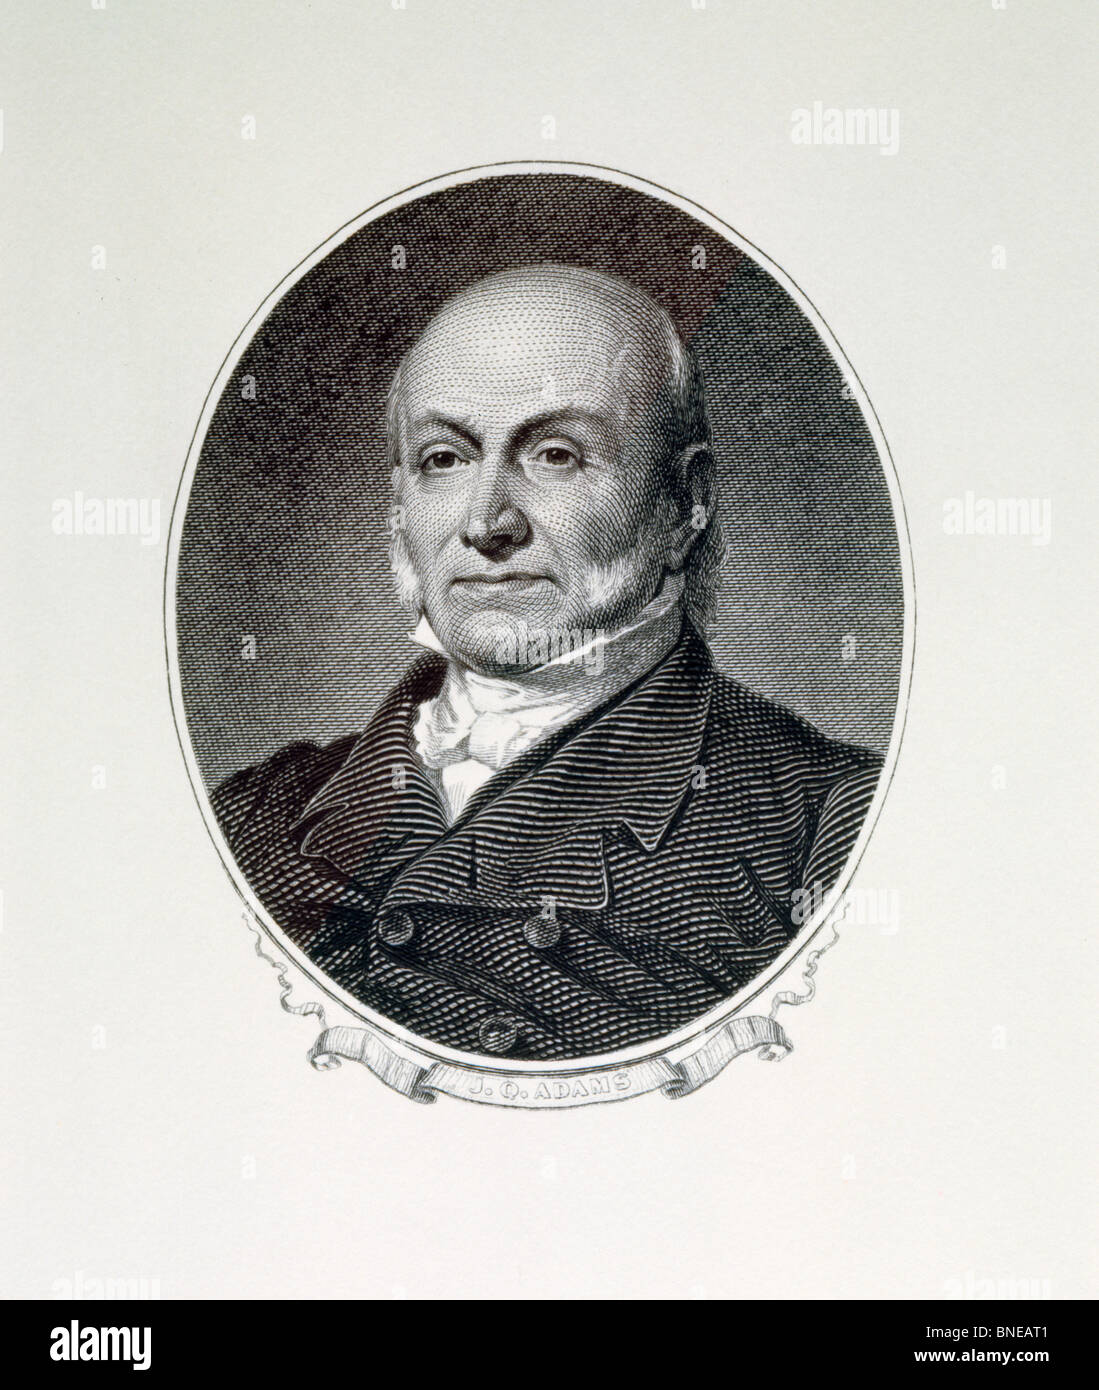 John Quincy Adams, sixth President of United States, engraving, (1767-1848) Stock Photo